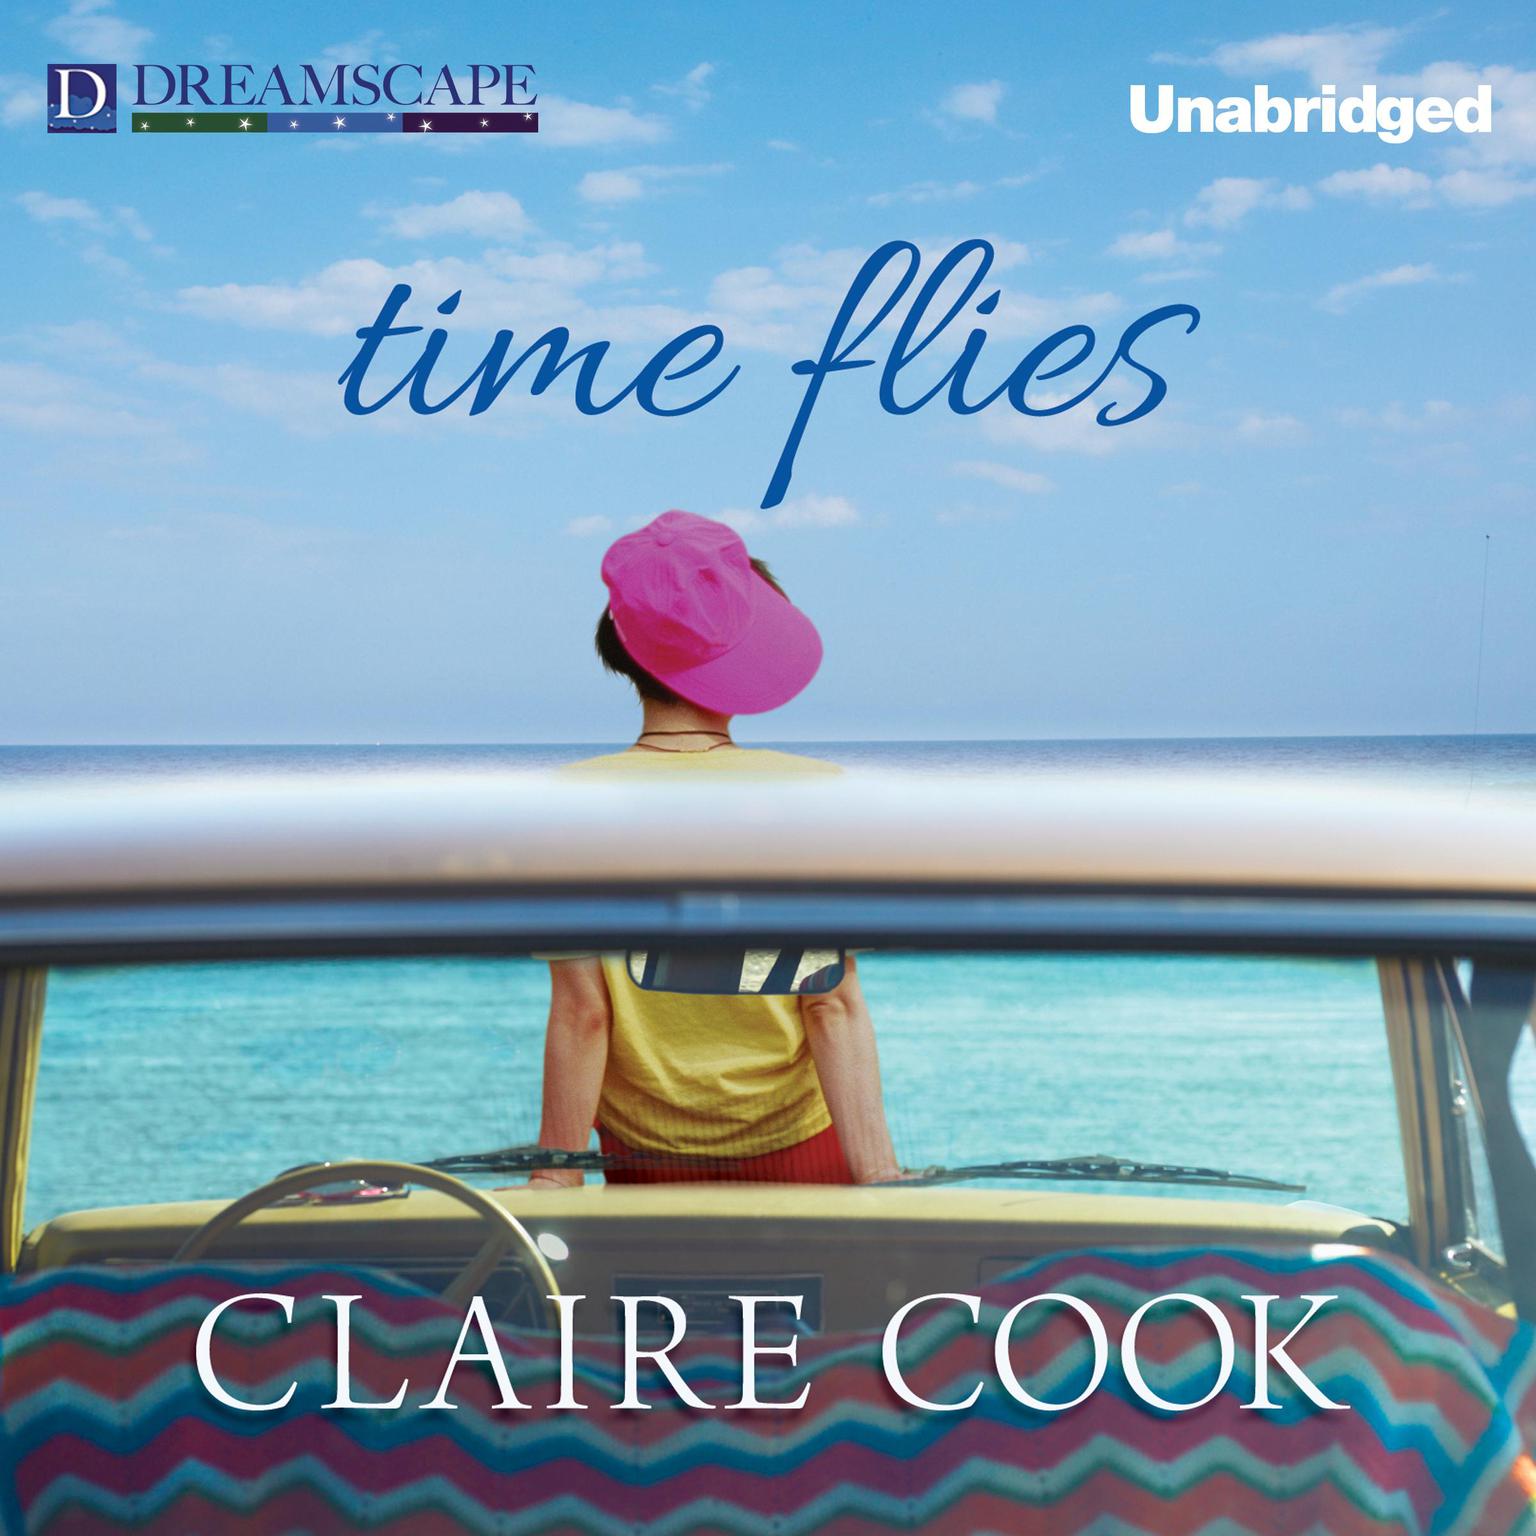 Time Flies Audiobook, by Claire Cook